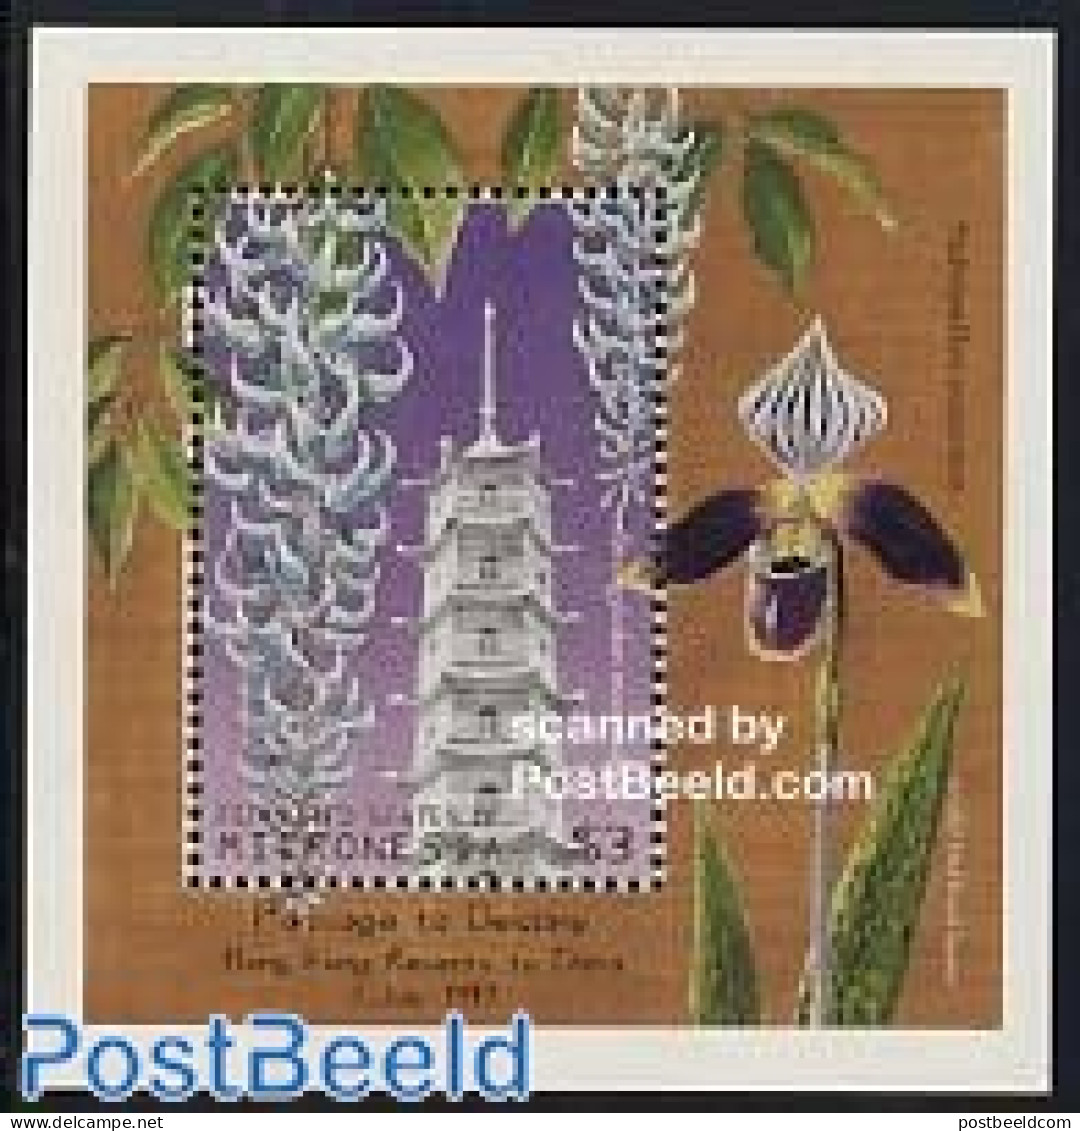 Micronesia 1997 Hong Kong To China S/s ($3), Mint NH, History - Nature - History - Flowers & Plants - Orchids - Micronésie